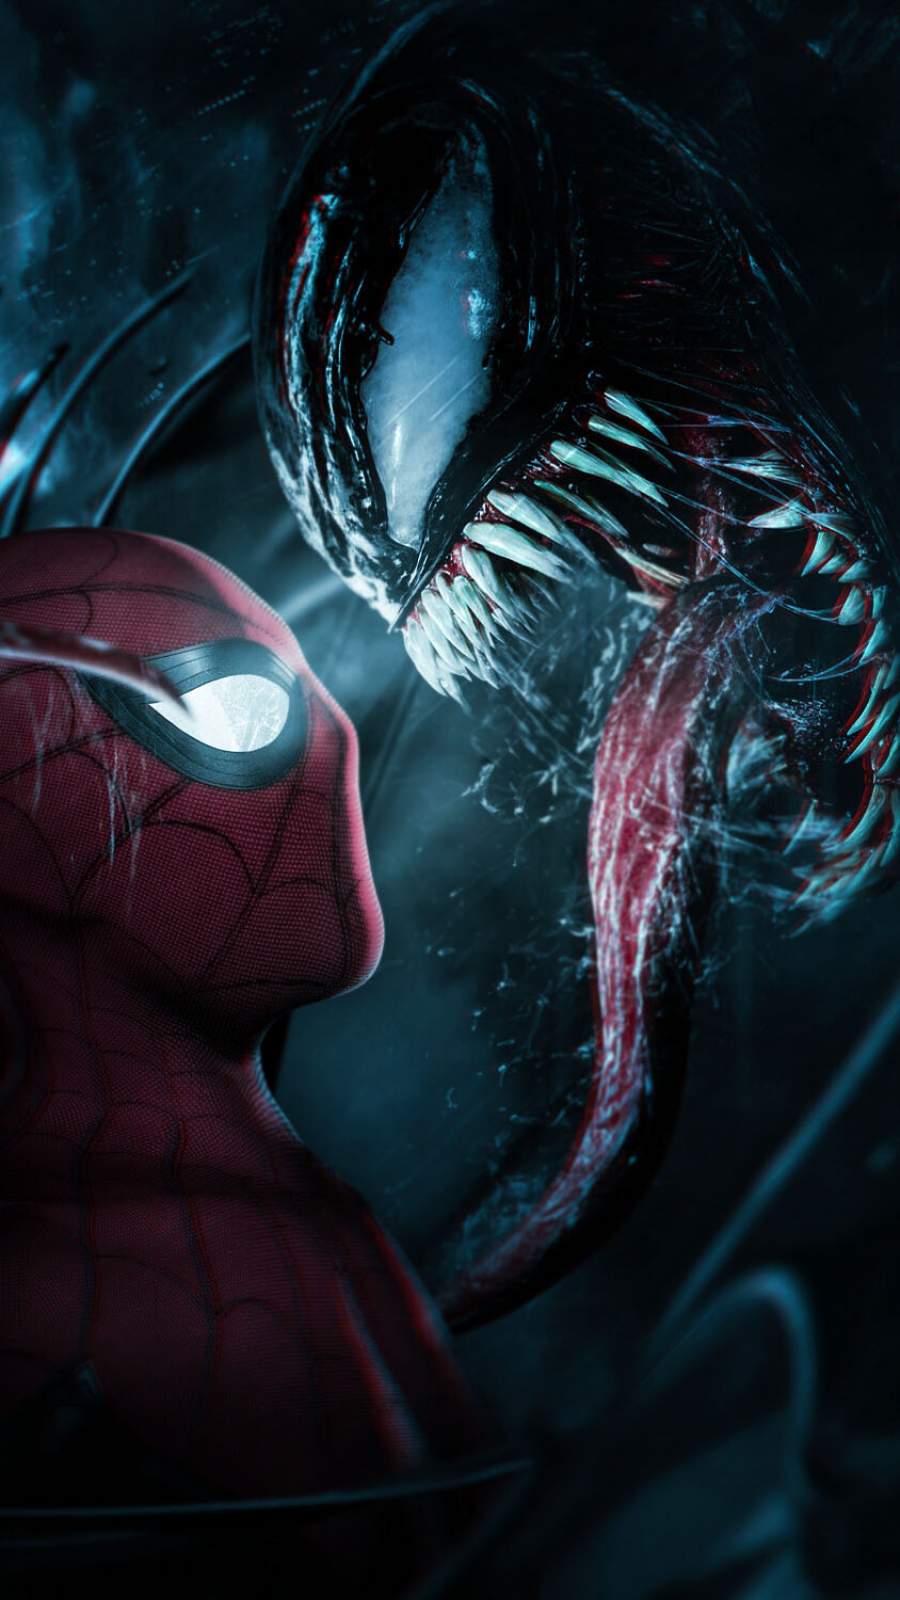 Spiderman Iphone Mobile Wallpapers Image - Spiderman And Venom Fan Art - HD Wallpaper 